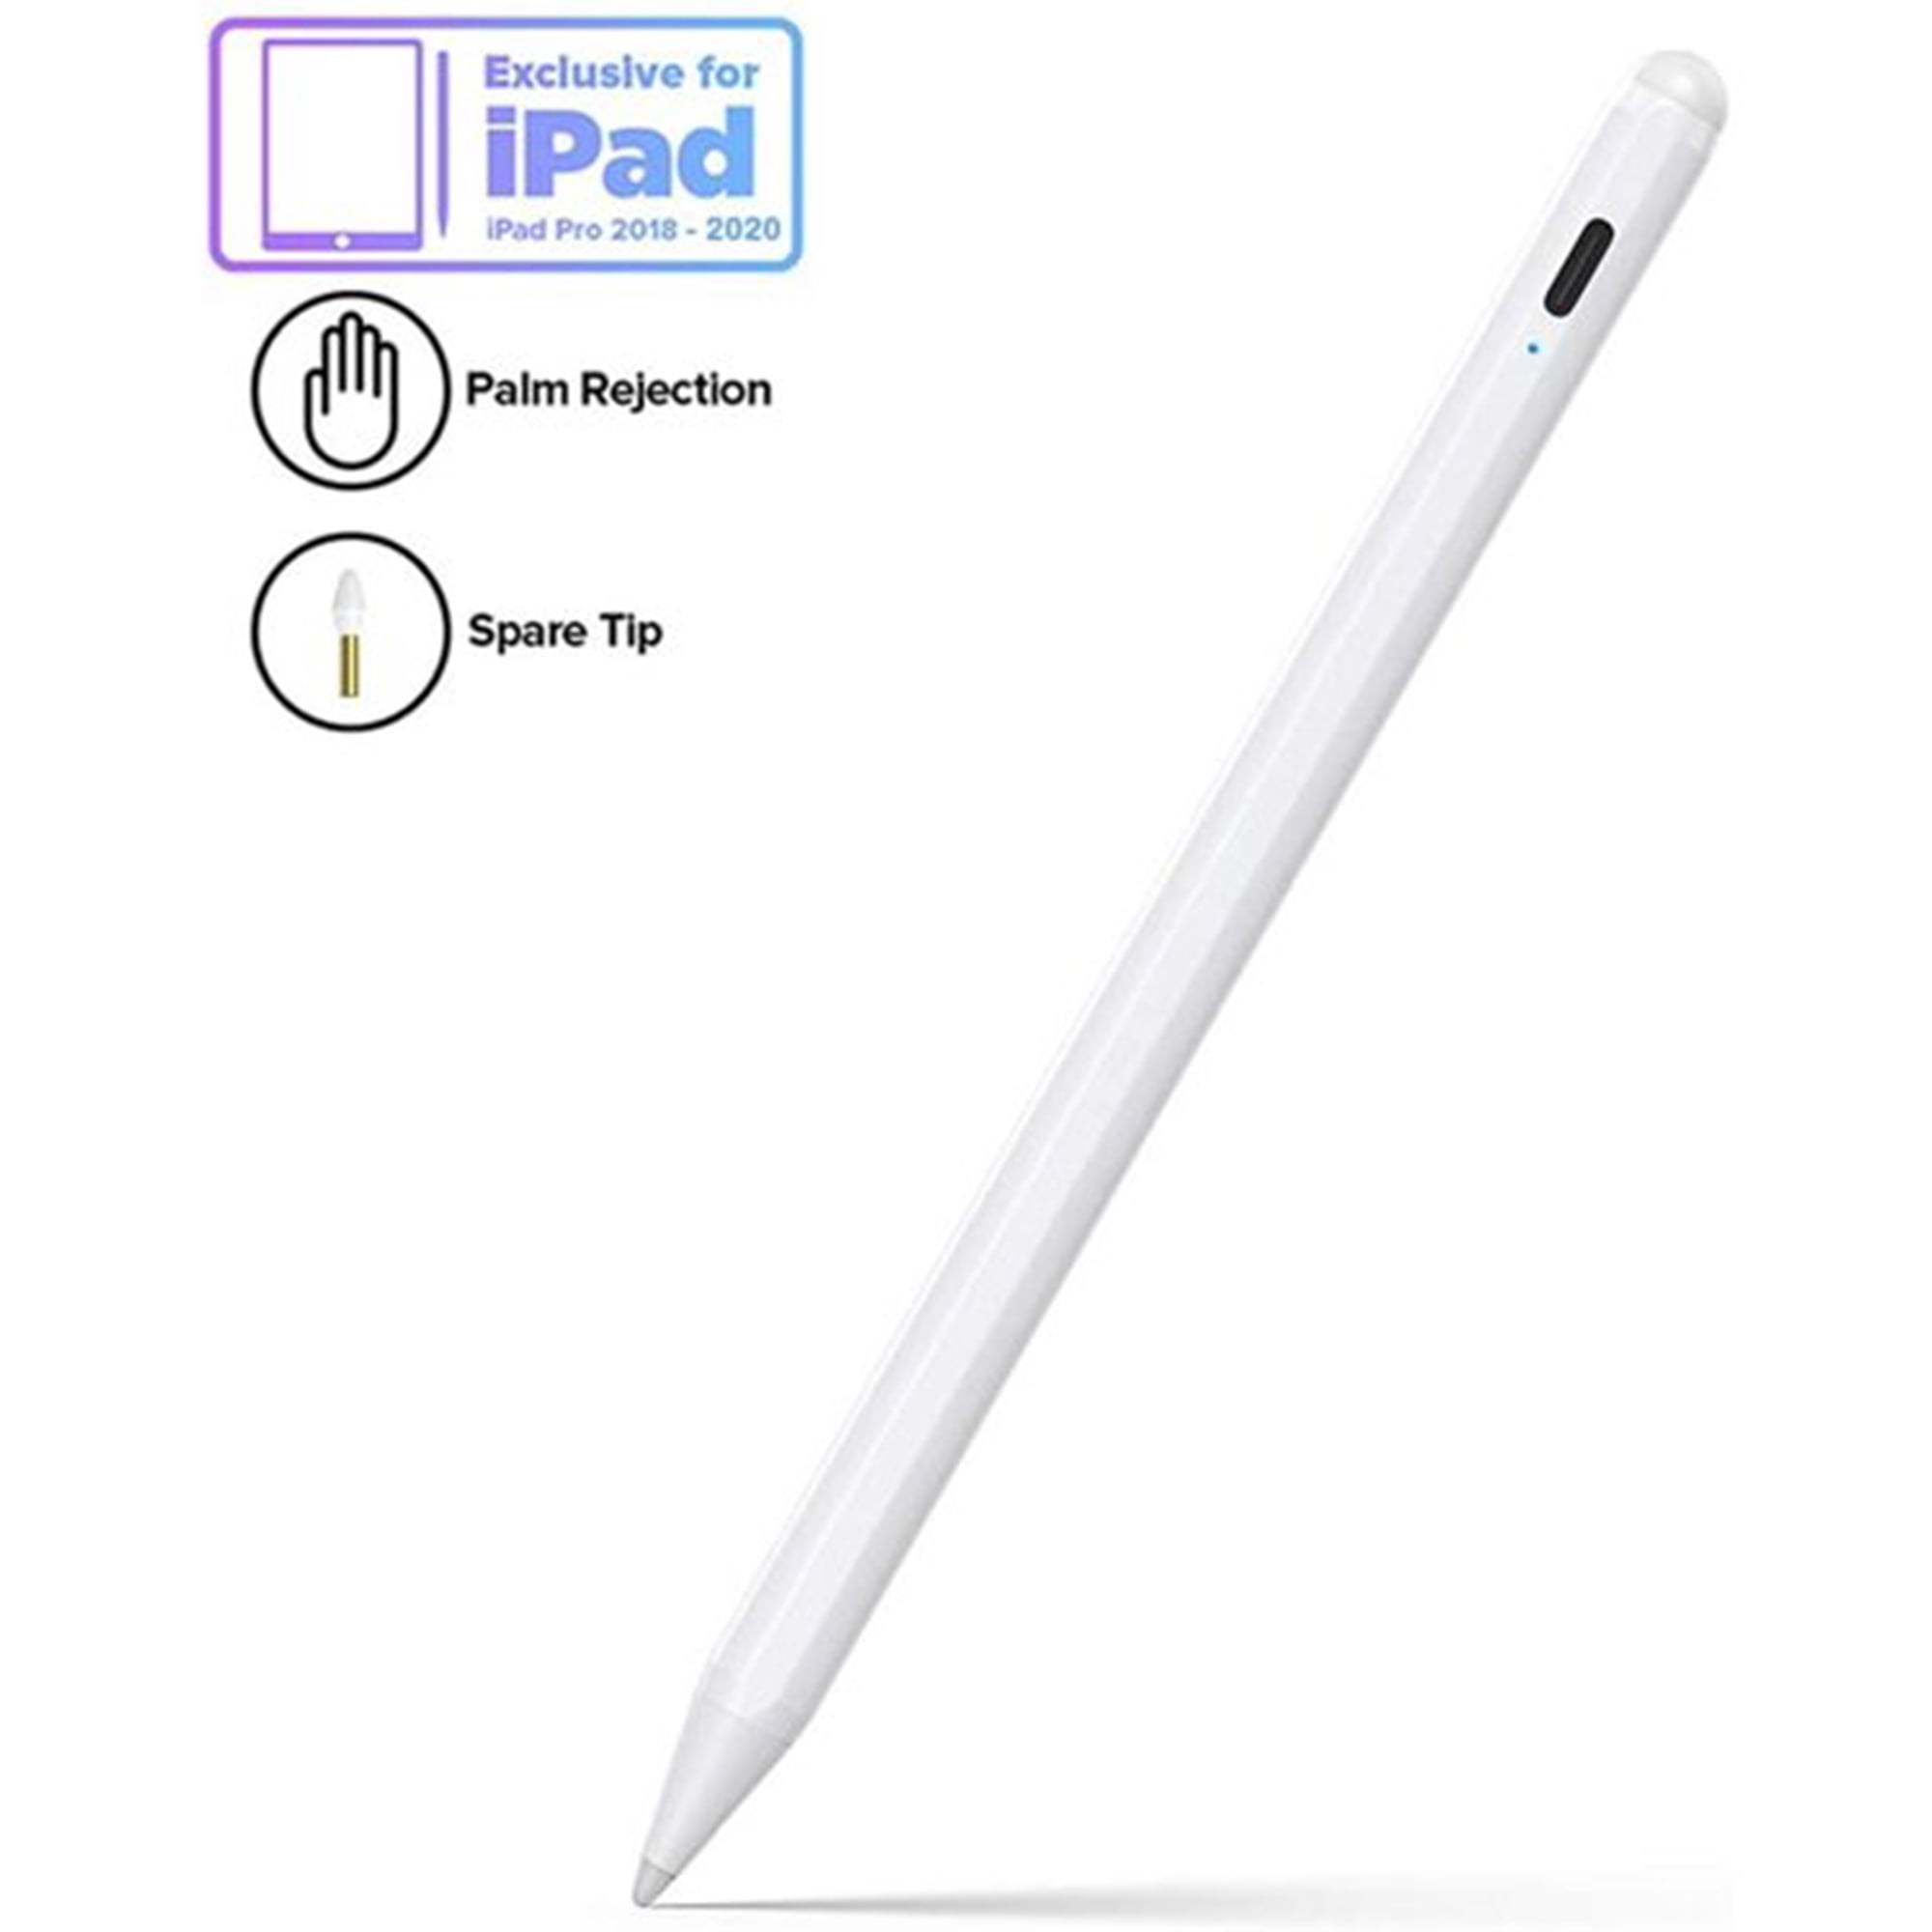 iPad Air 3rd for Precise Writing/Drawing iPad Pro Stylus Pen for iPad with Palm Rejection,Active Pencil Compatible with ,iPad 6/7 Gen,iPad Mini 5th Black 2018-2020 11/12.9 Inch